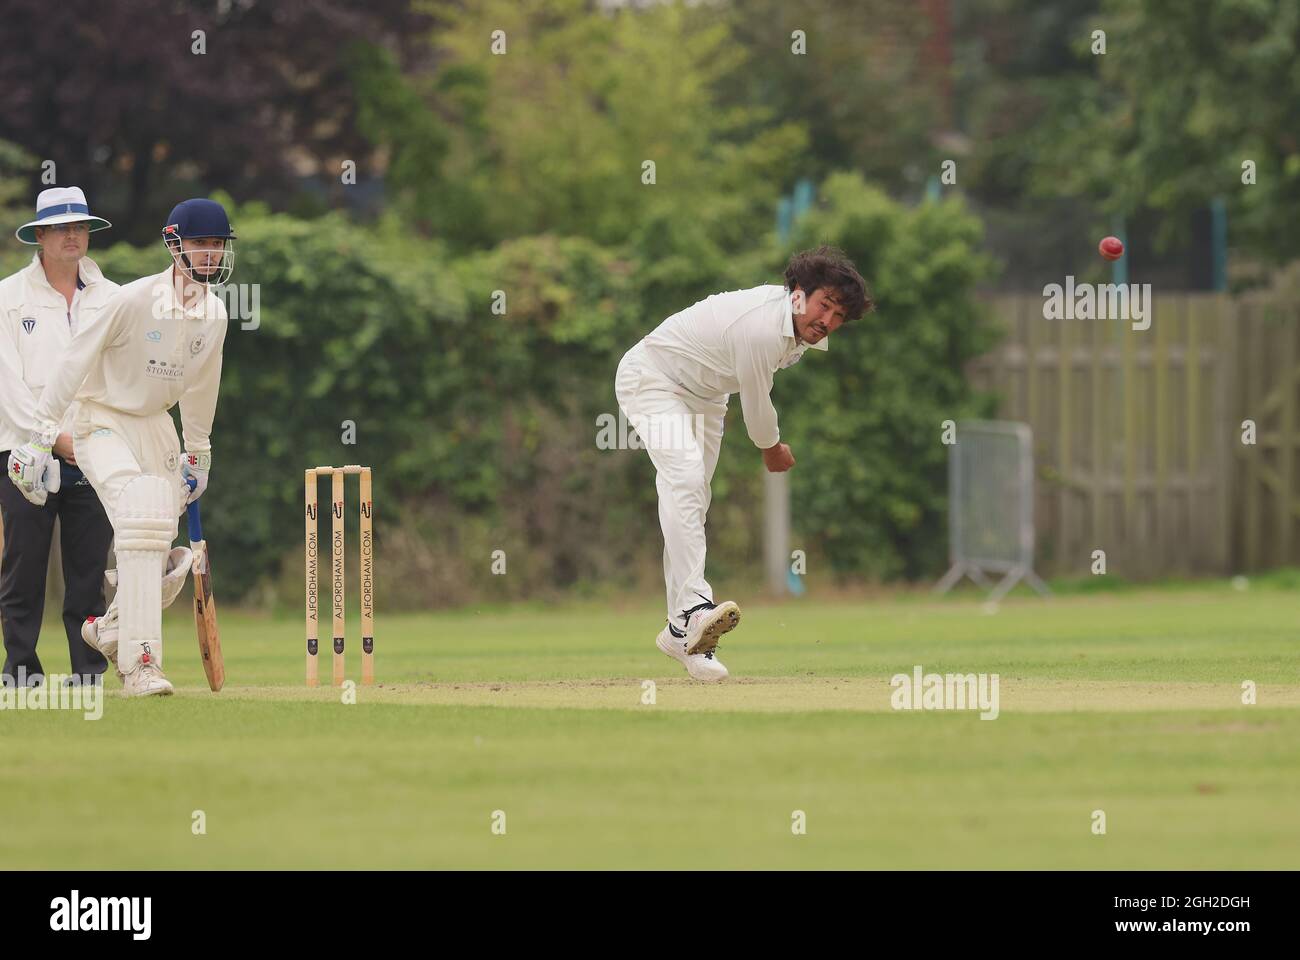 London, UK. 4 September, 2021. South London, UK.  G H Crawford-Khan bowling for Dulwich Cricket Club as they take on Dorking CC in the Surrey Championship Division 2 match at Dulwich, South London. David Rowe/ Alamy Live News Stock Photo